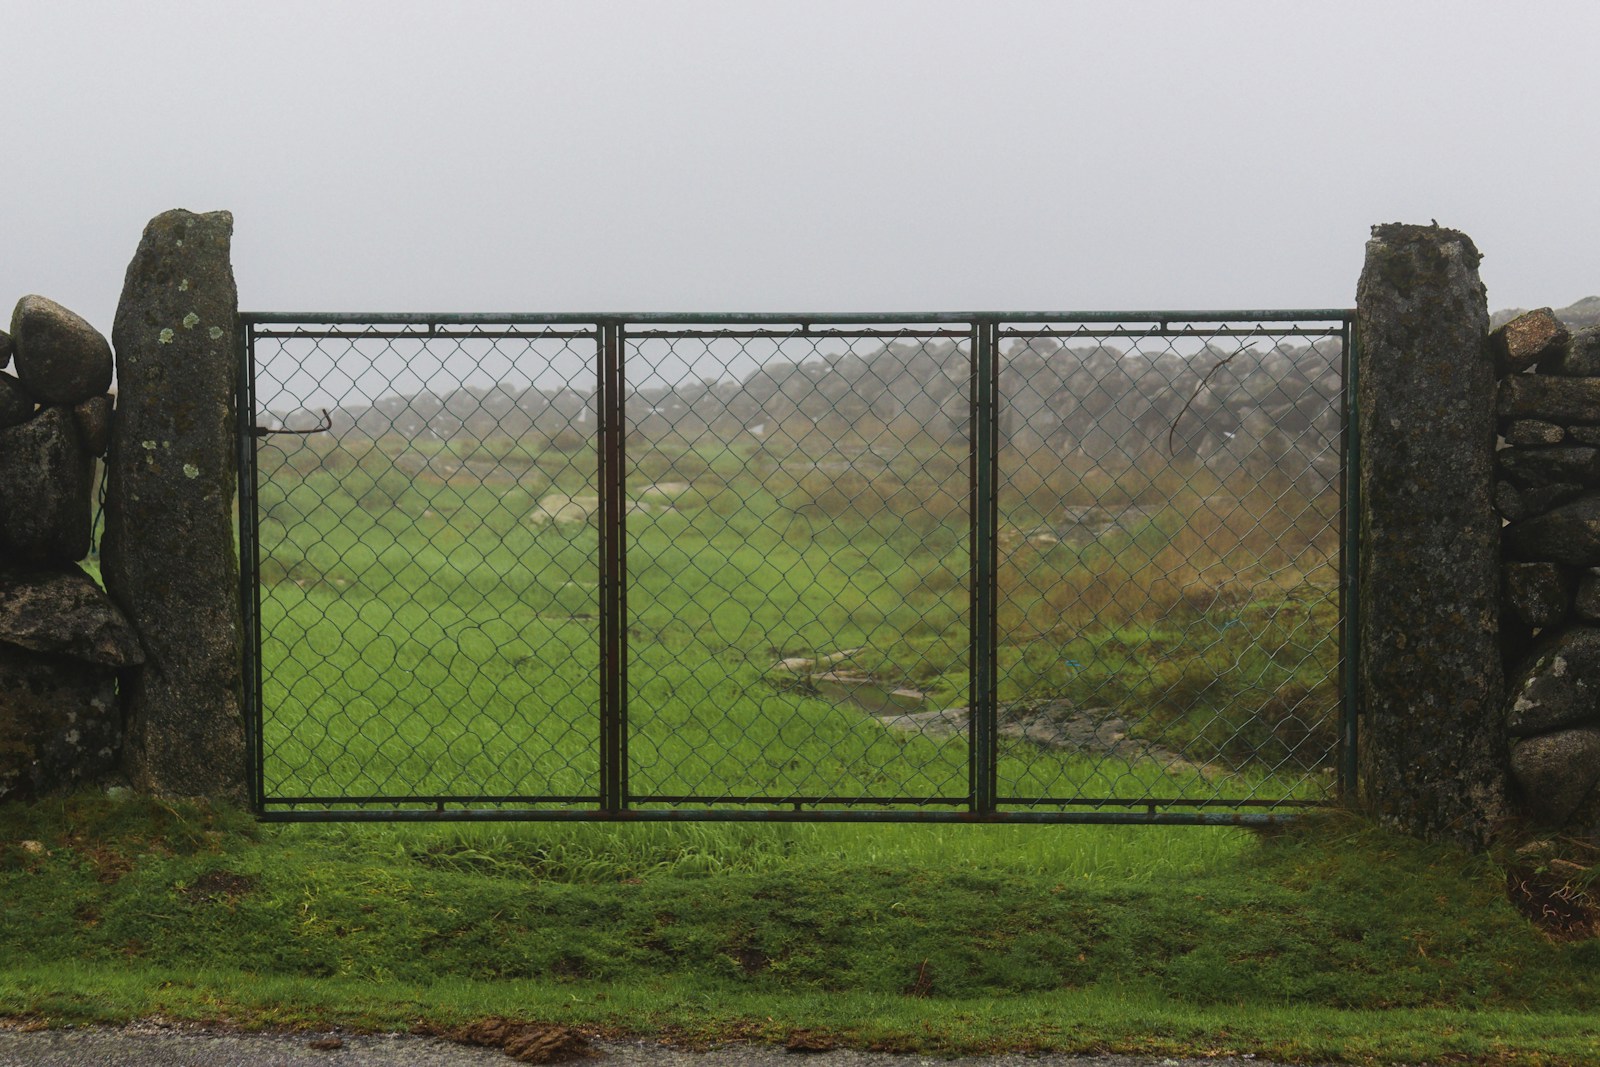 a fenced off area with a grassy field and rocks in the background